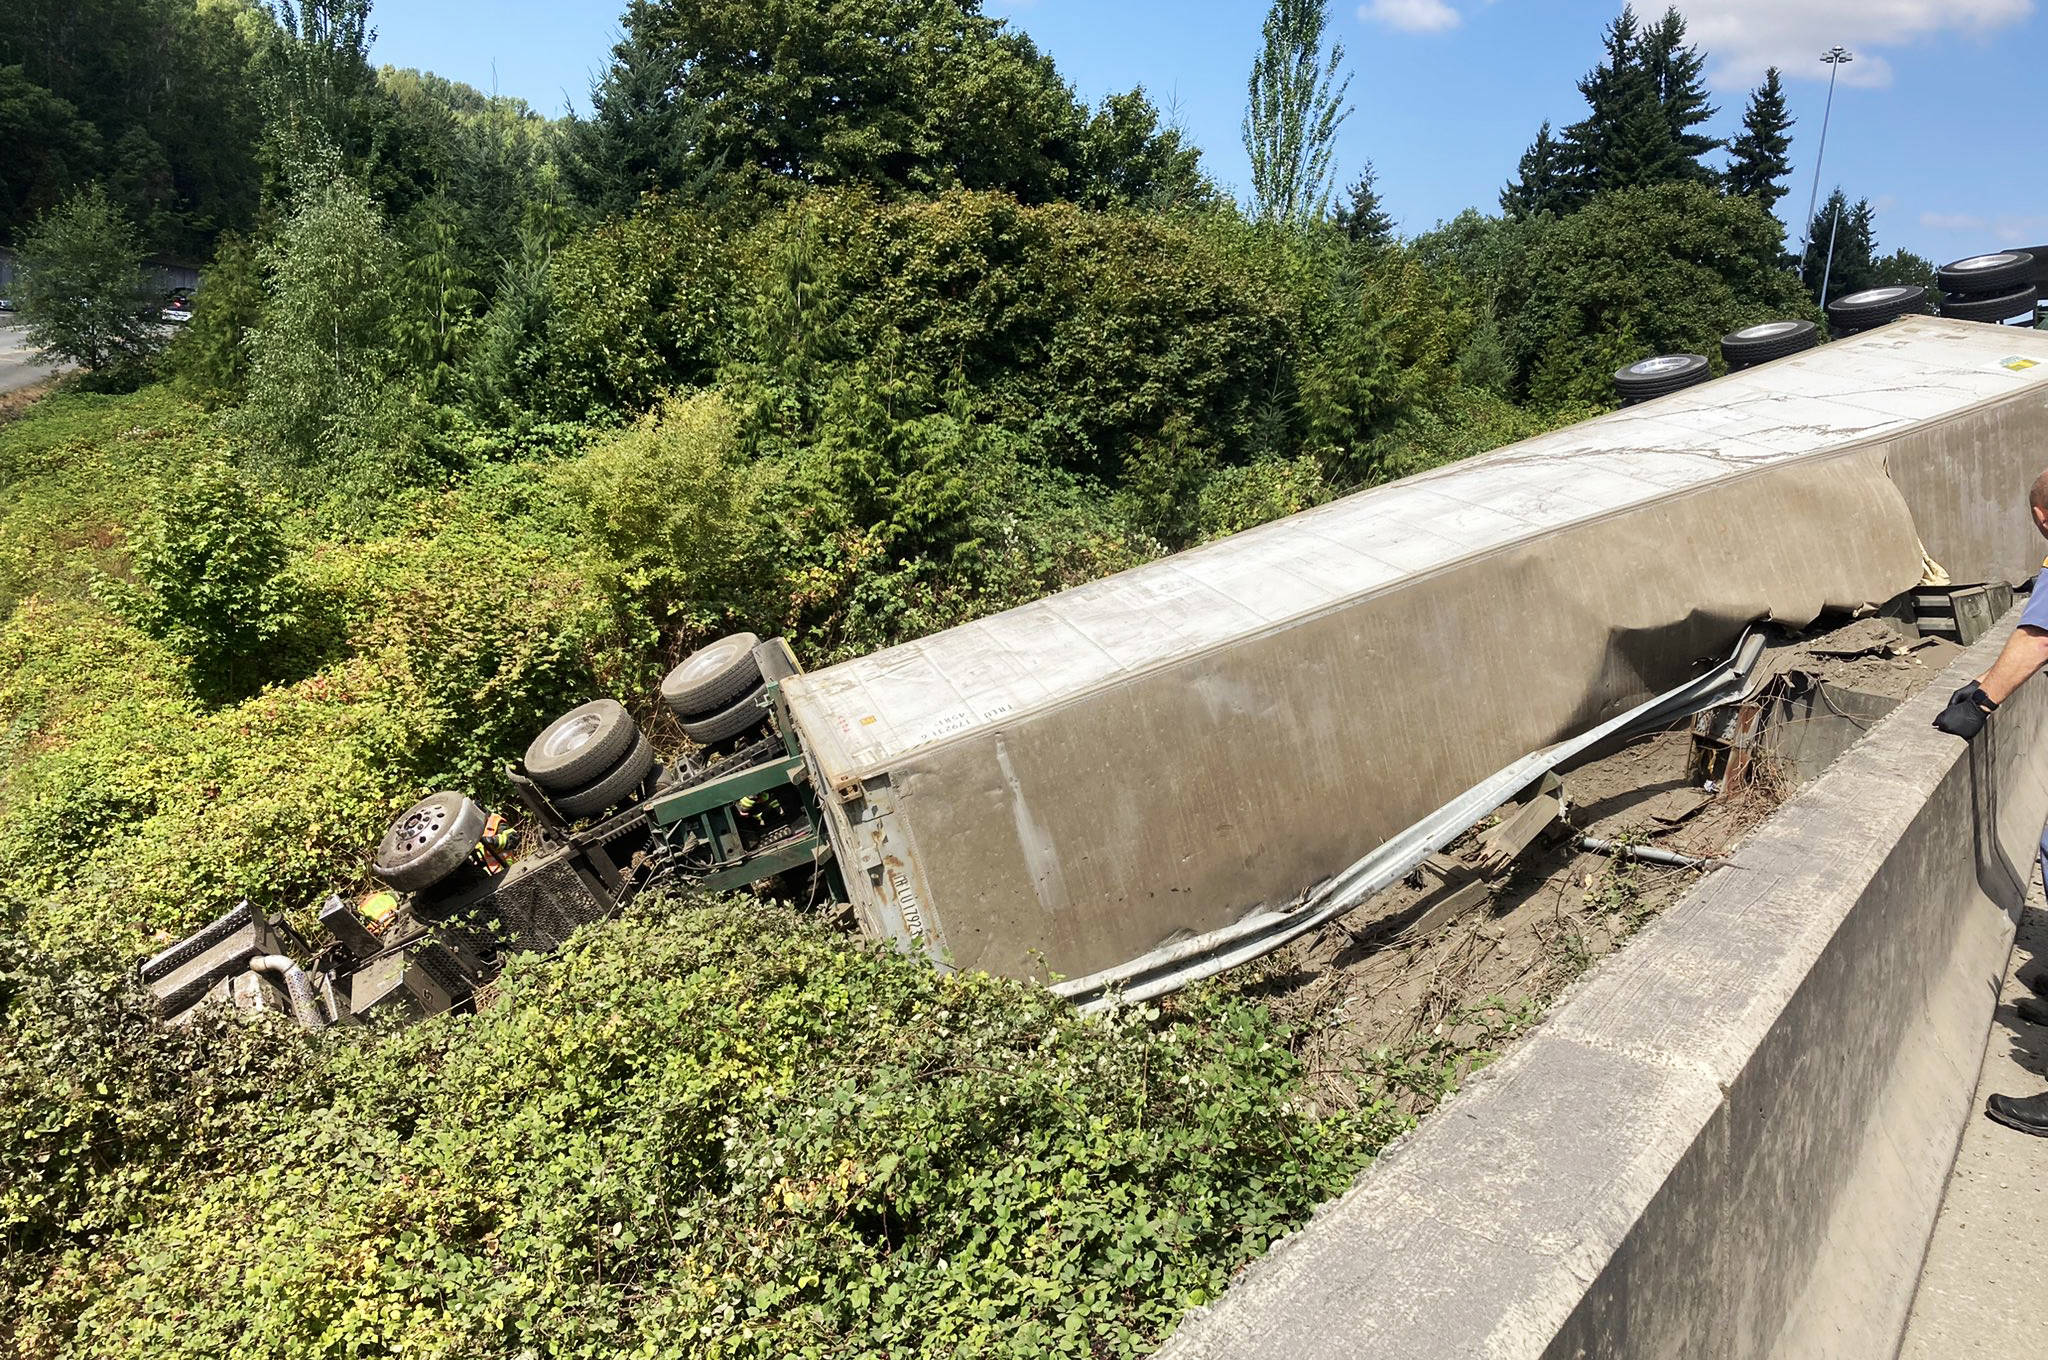 A 64-year-old Kent man died after his semi truck collided with a SUV on Aug. 23 along I-5 in Tukwila. COURTESY PHOTO, Washington State Patrol